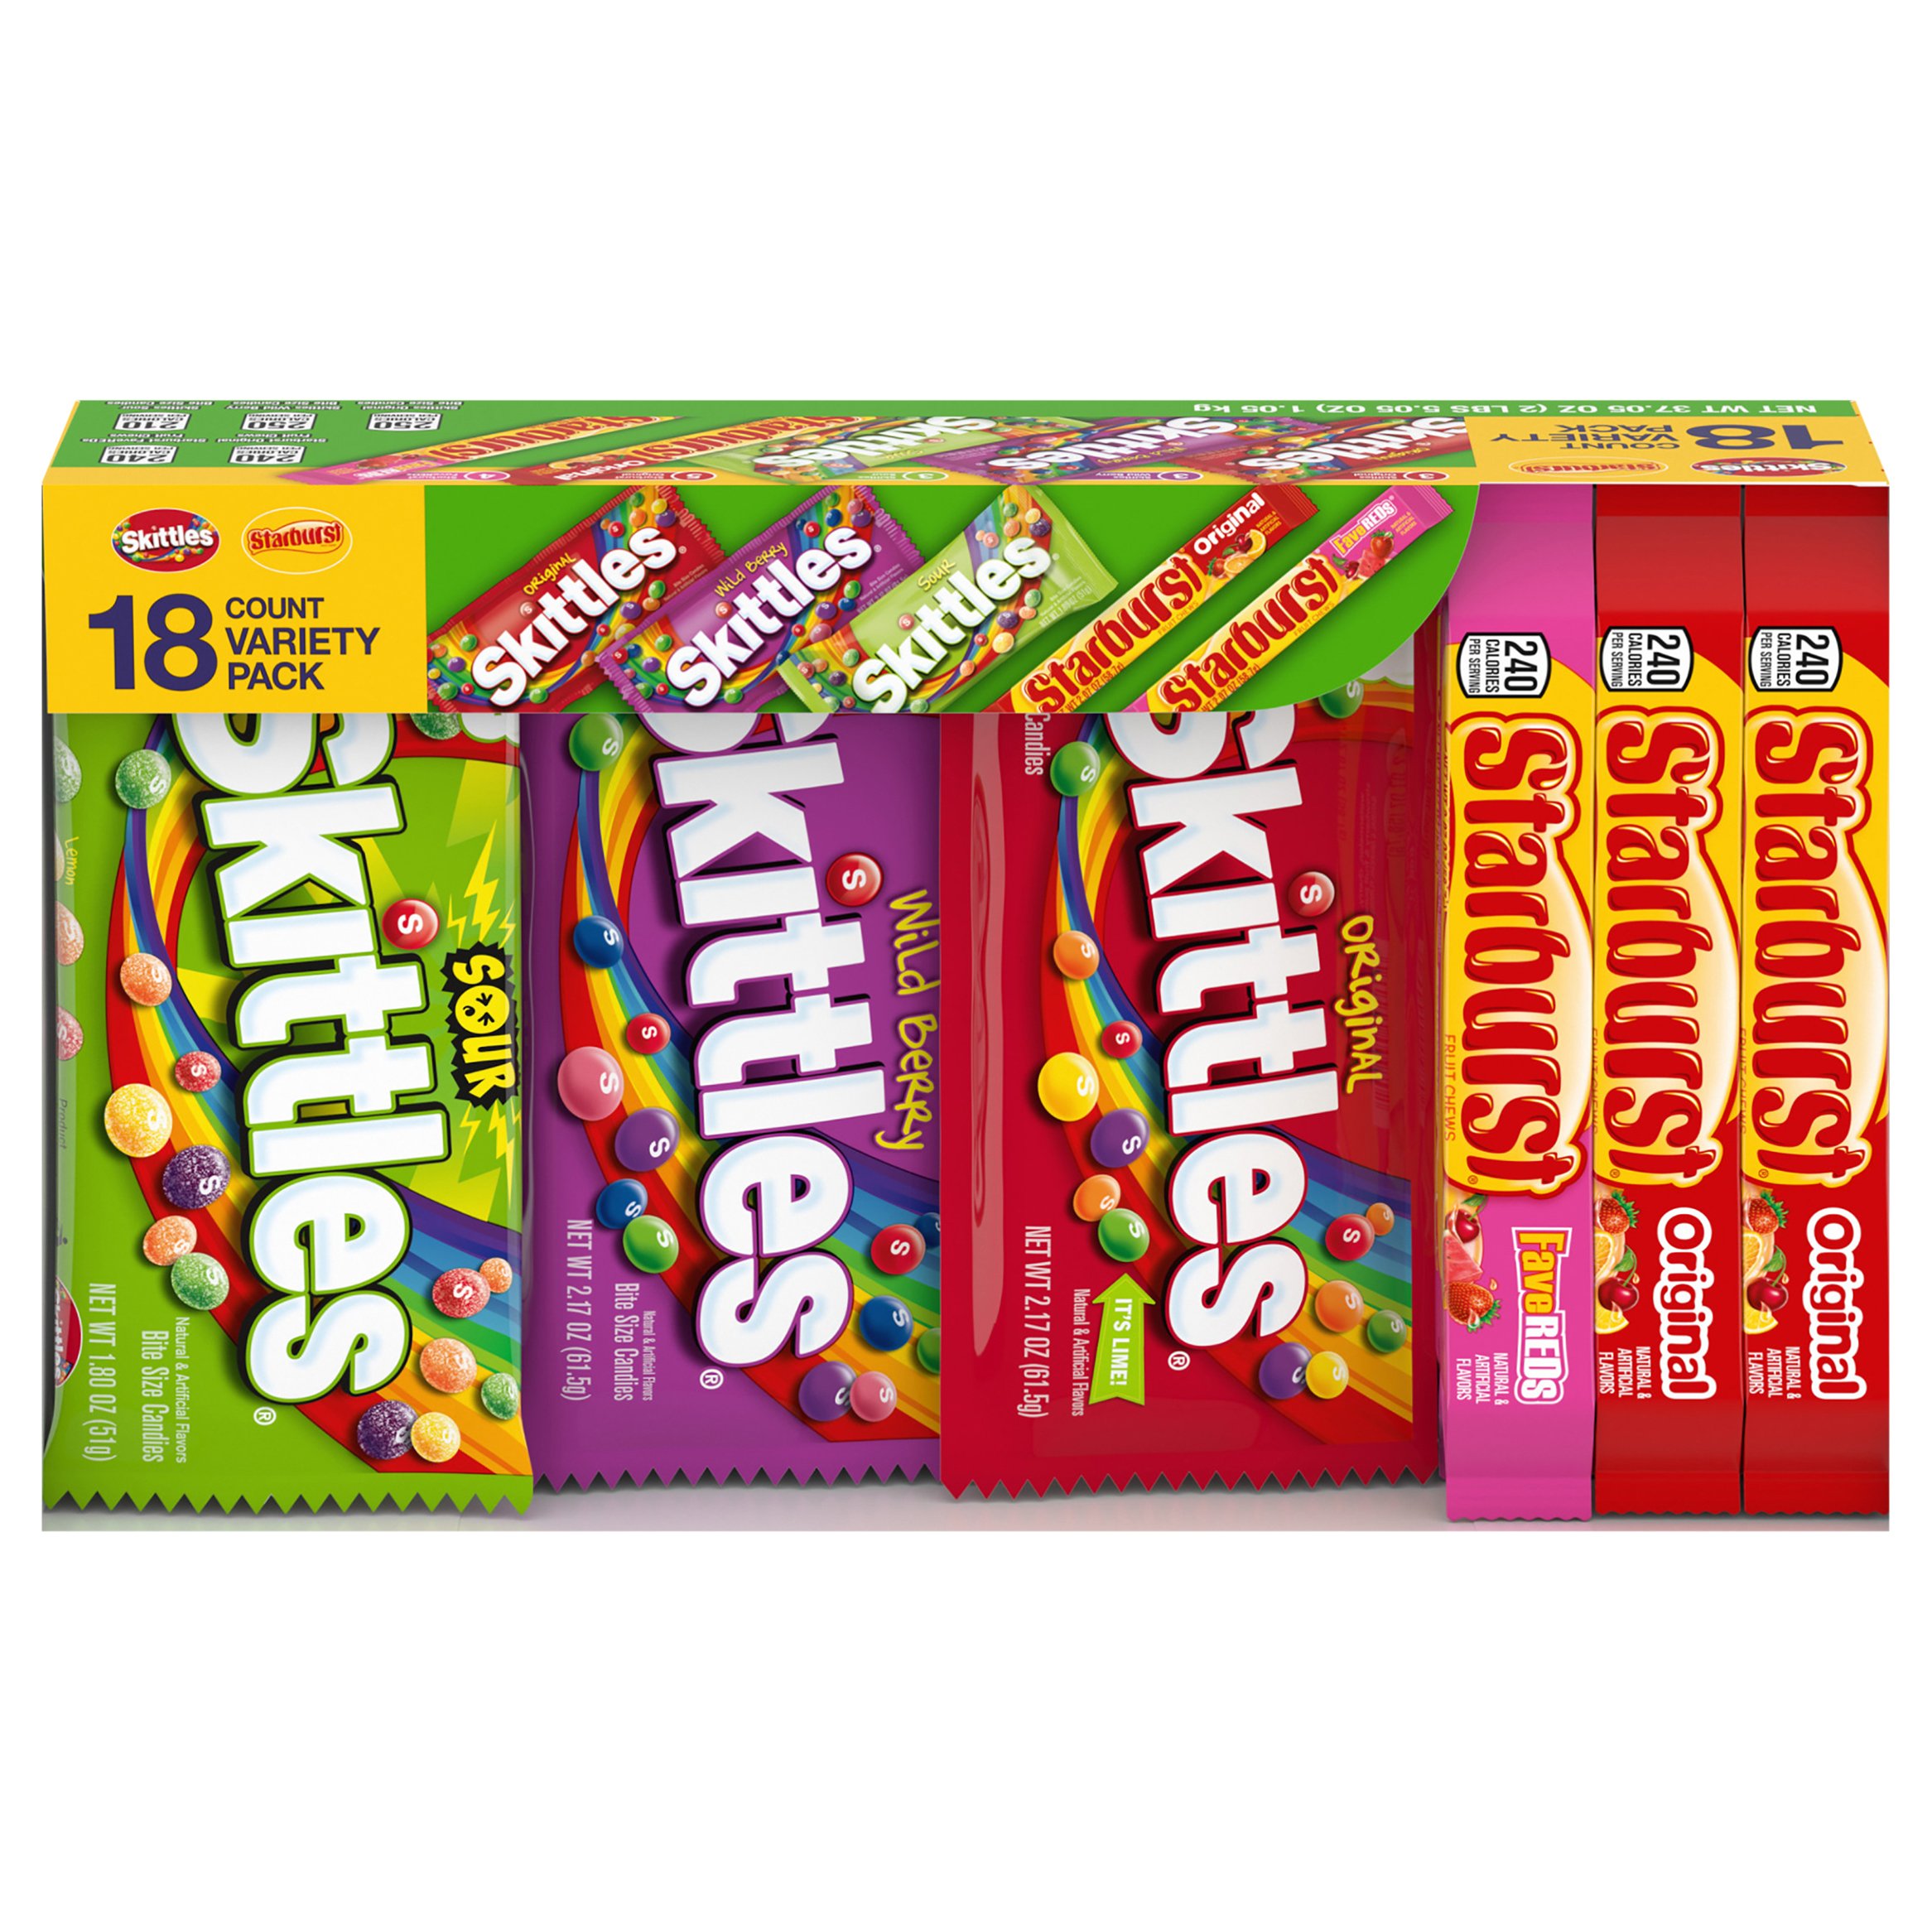 Mars Wrigley Skittles And Starburst Assorted Chewy Candy Shop Candy At H E B